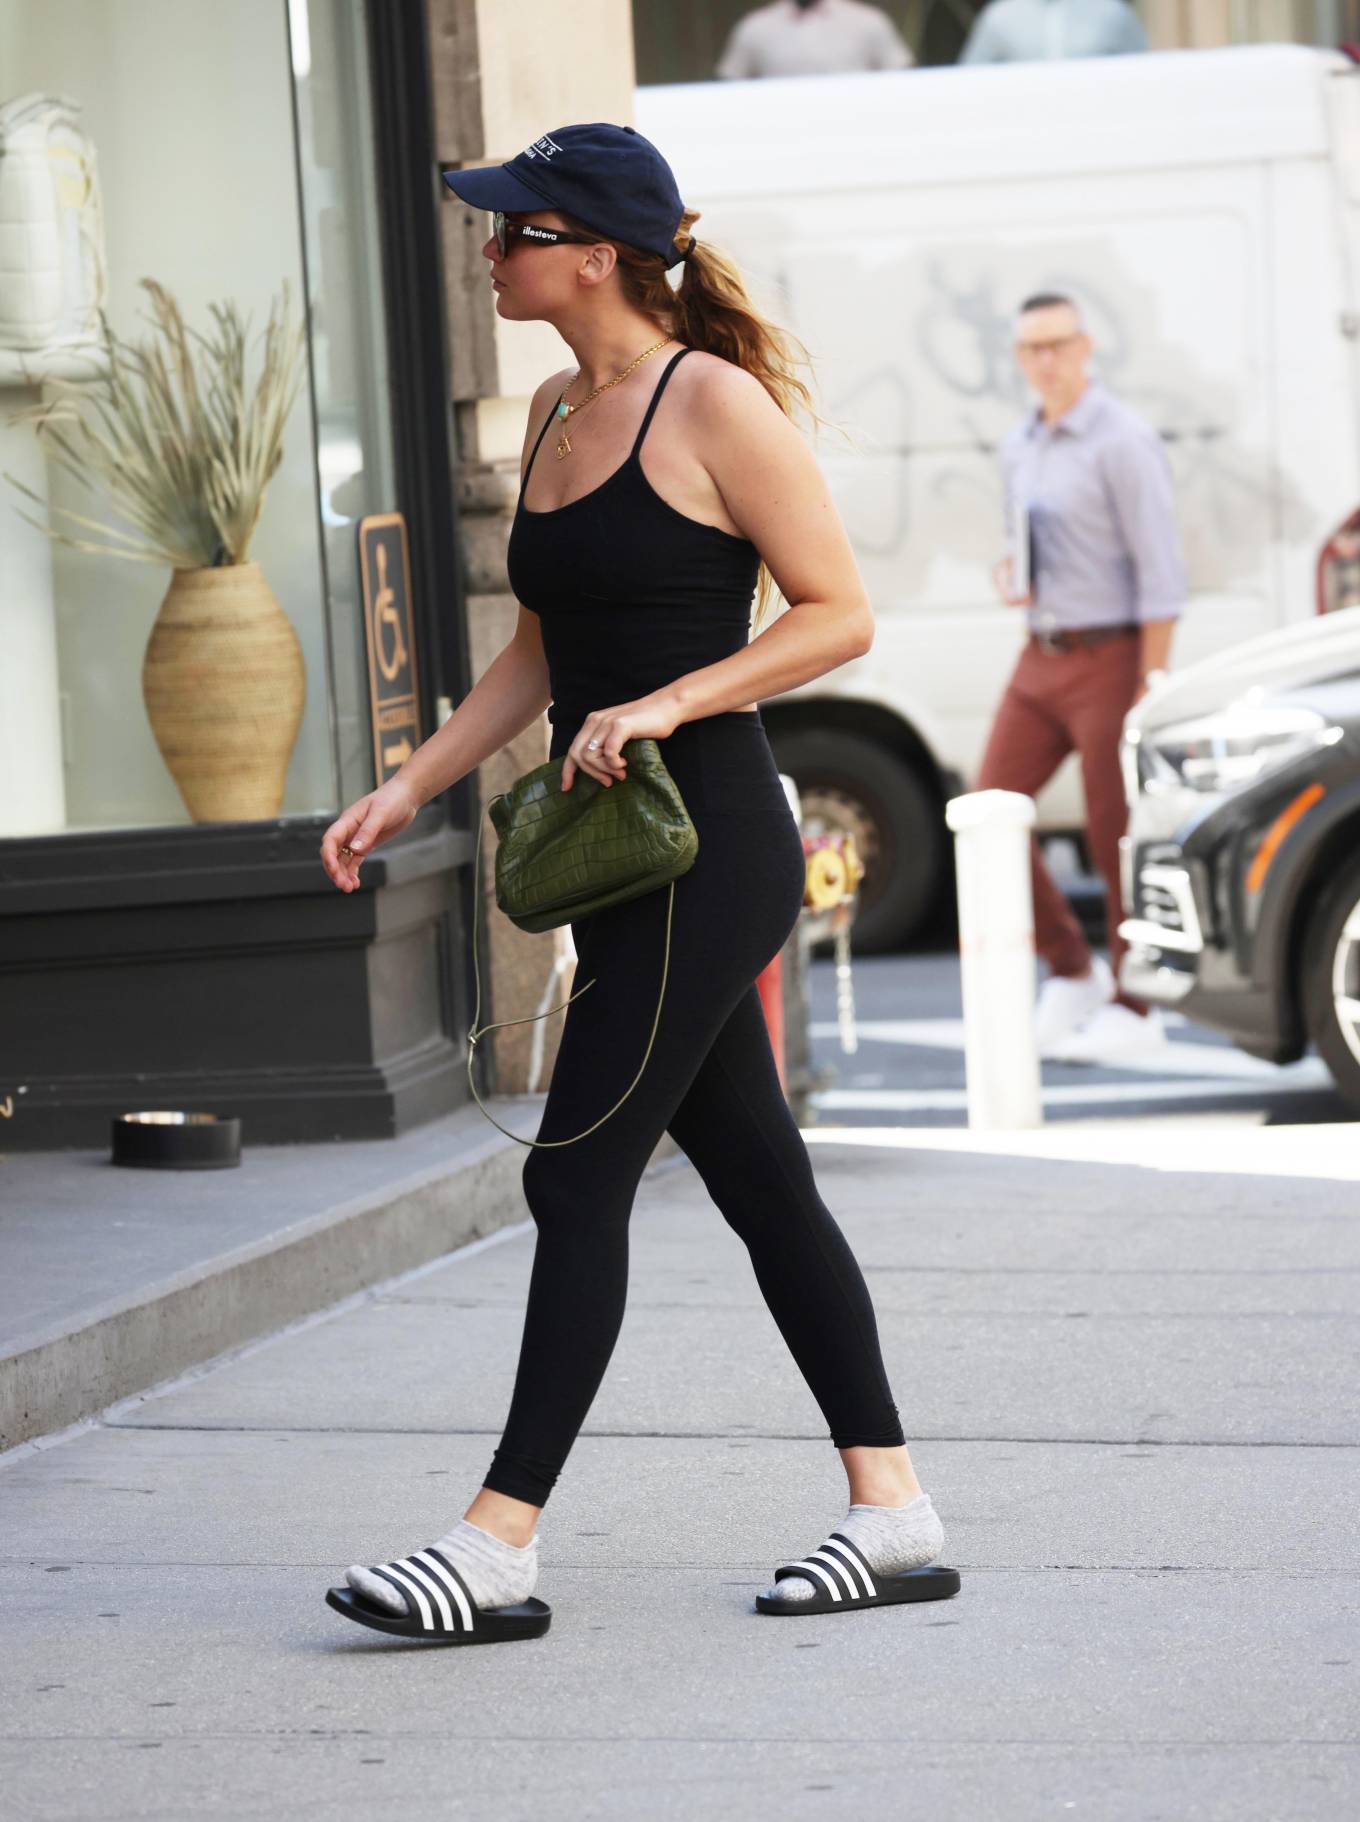 Jennifer Lawrence - Heading to the gym in New York City.